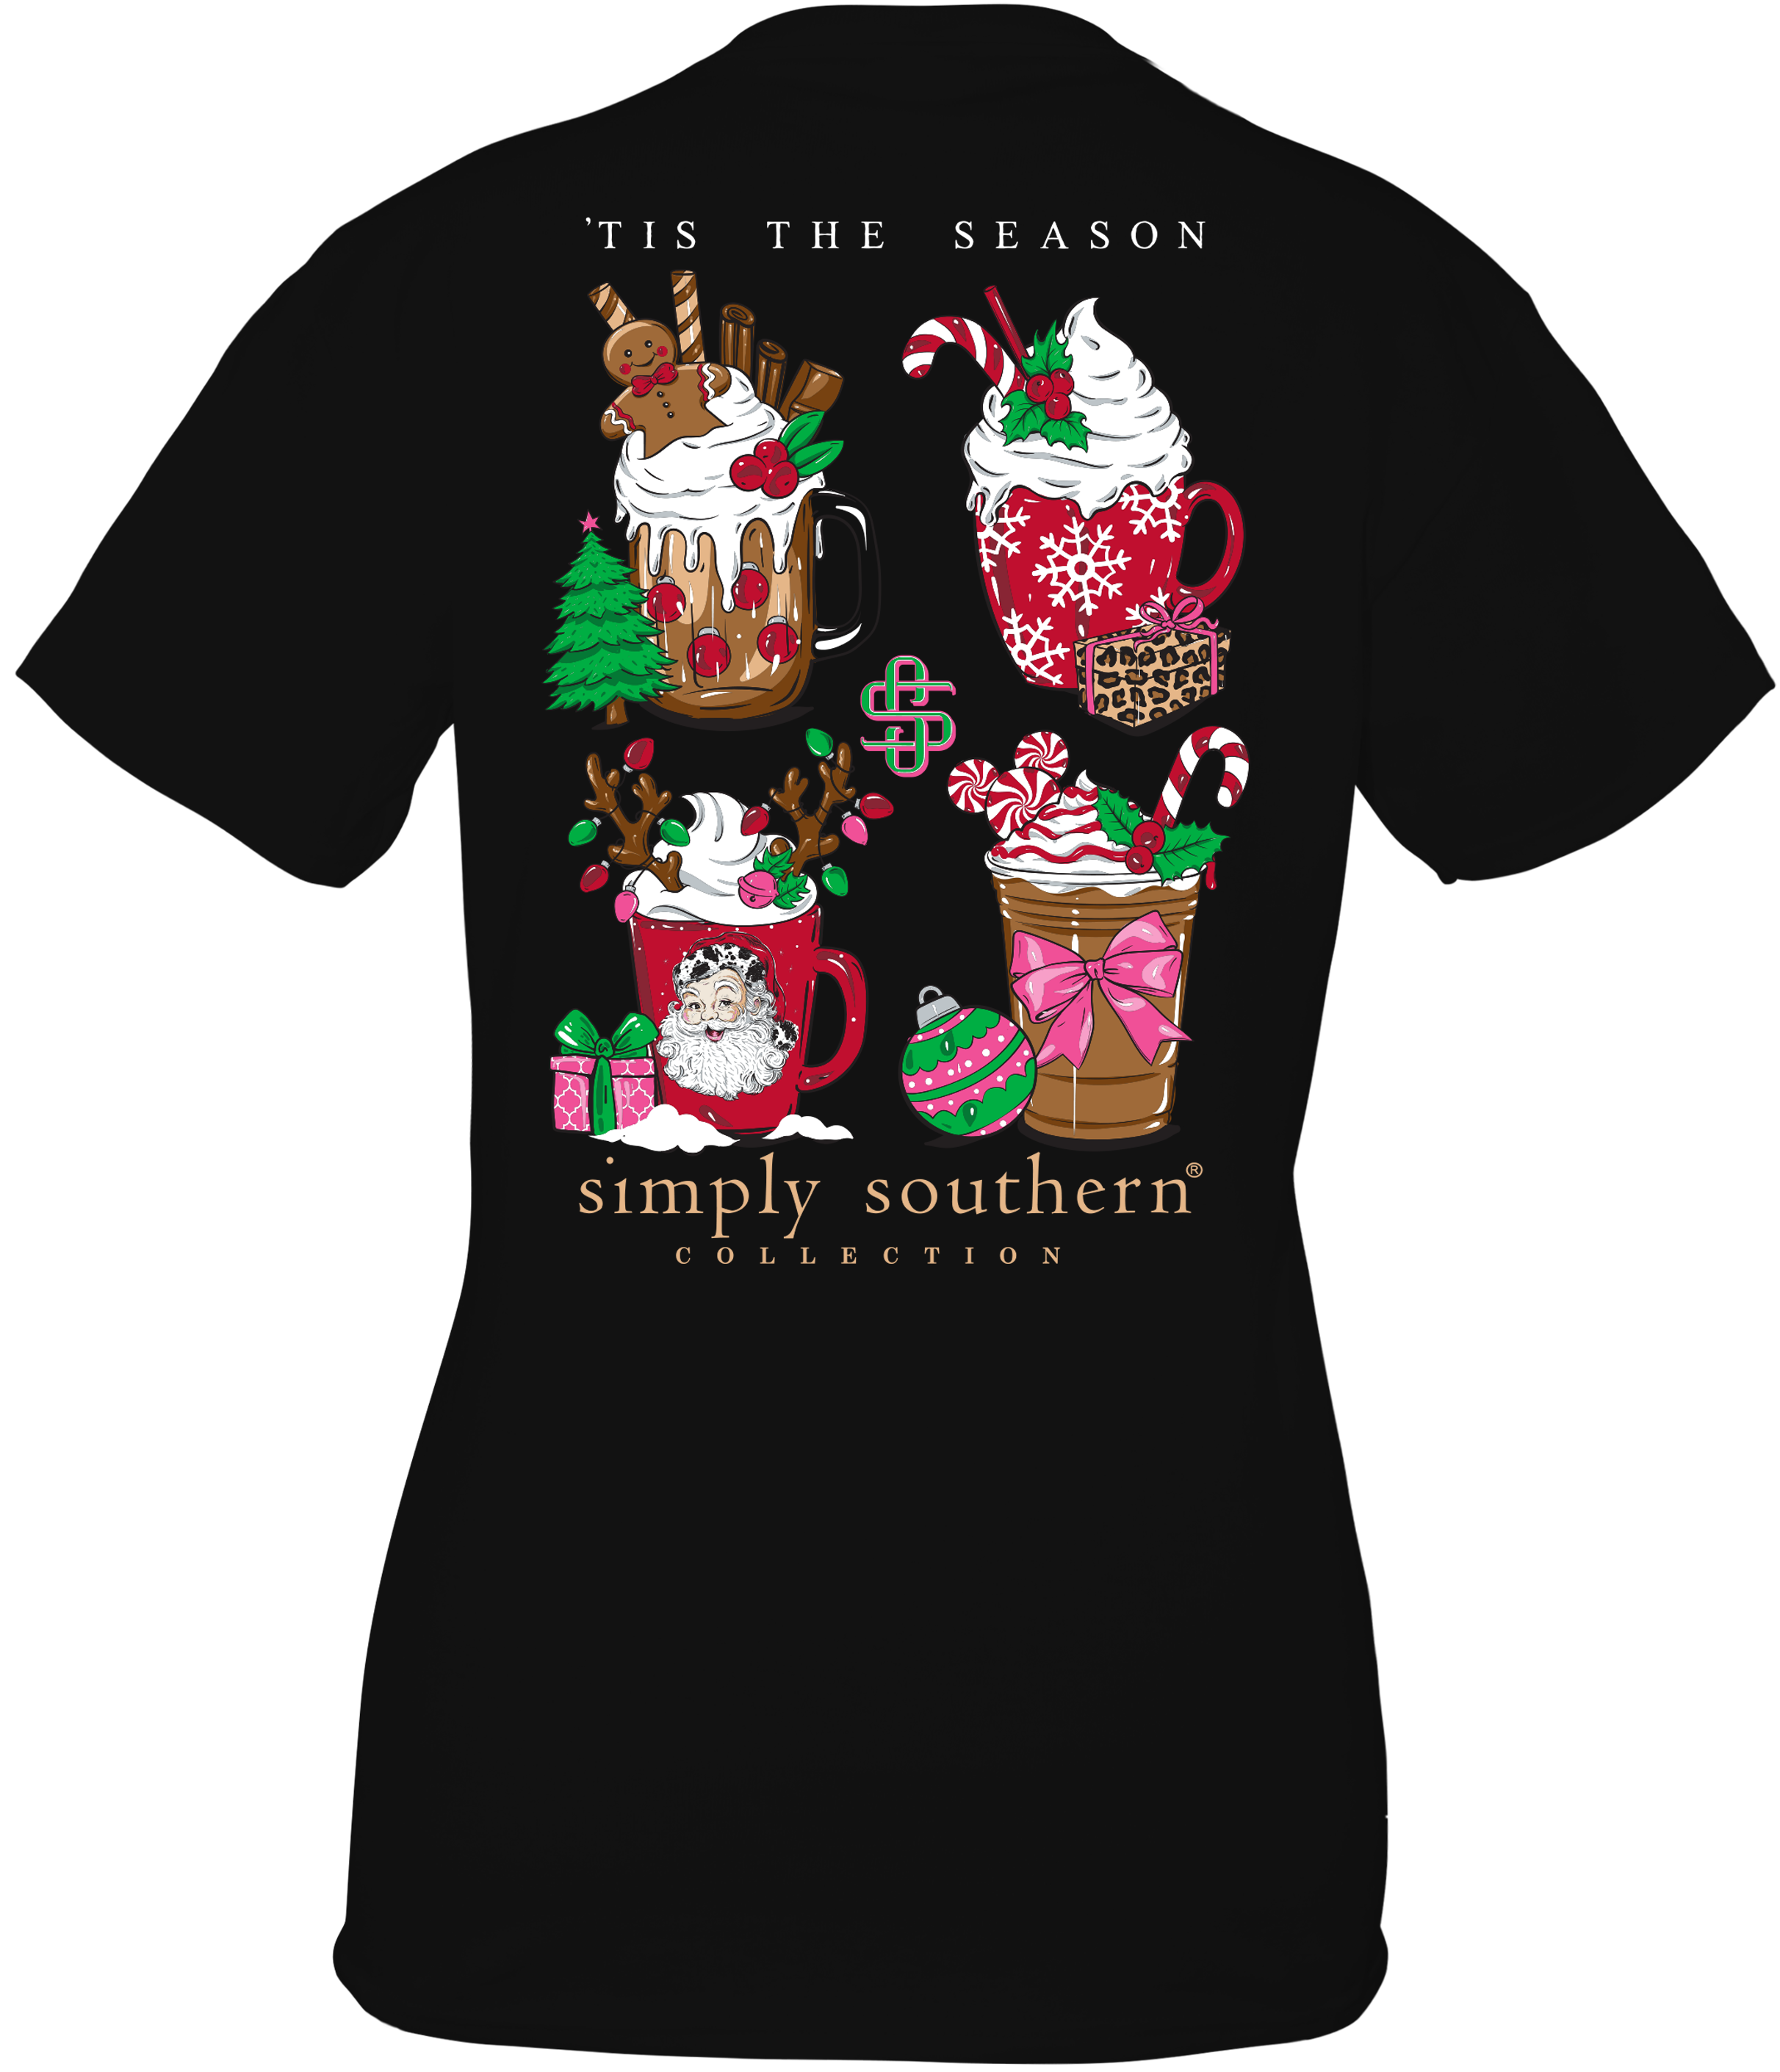 Youth 'Tis The Season' Christmas Short Sleeve Tee by Simply Southern